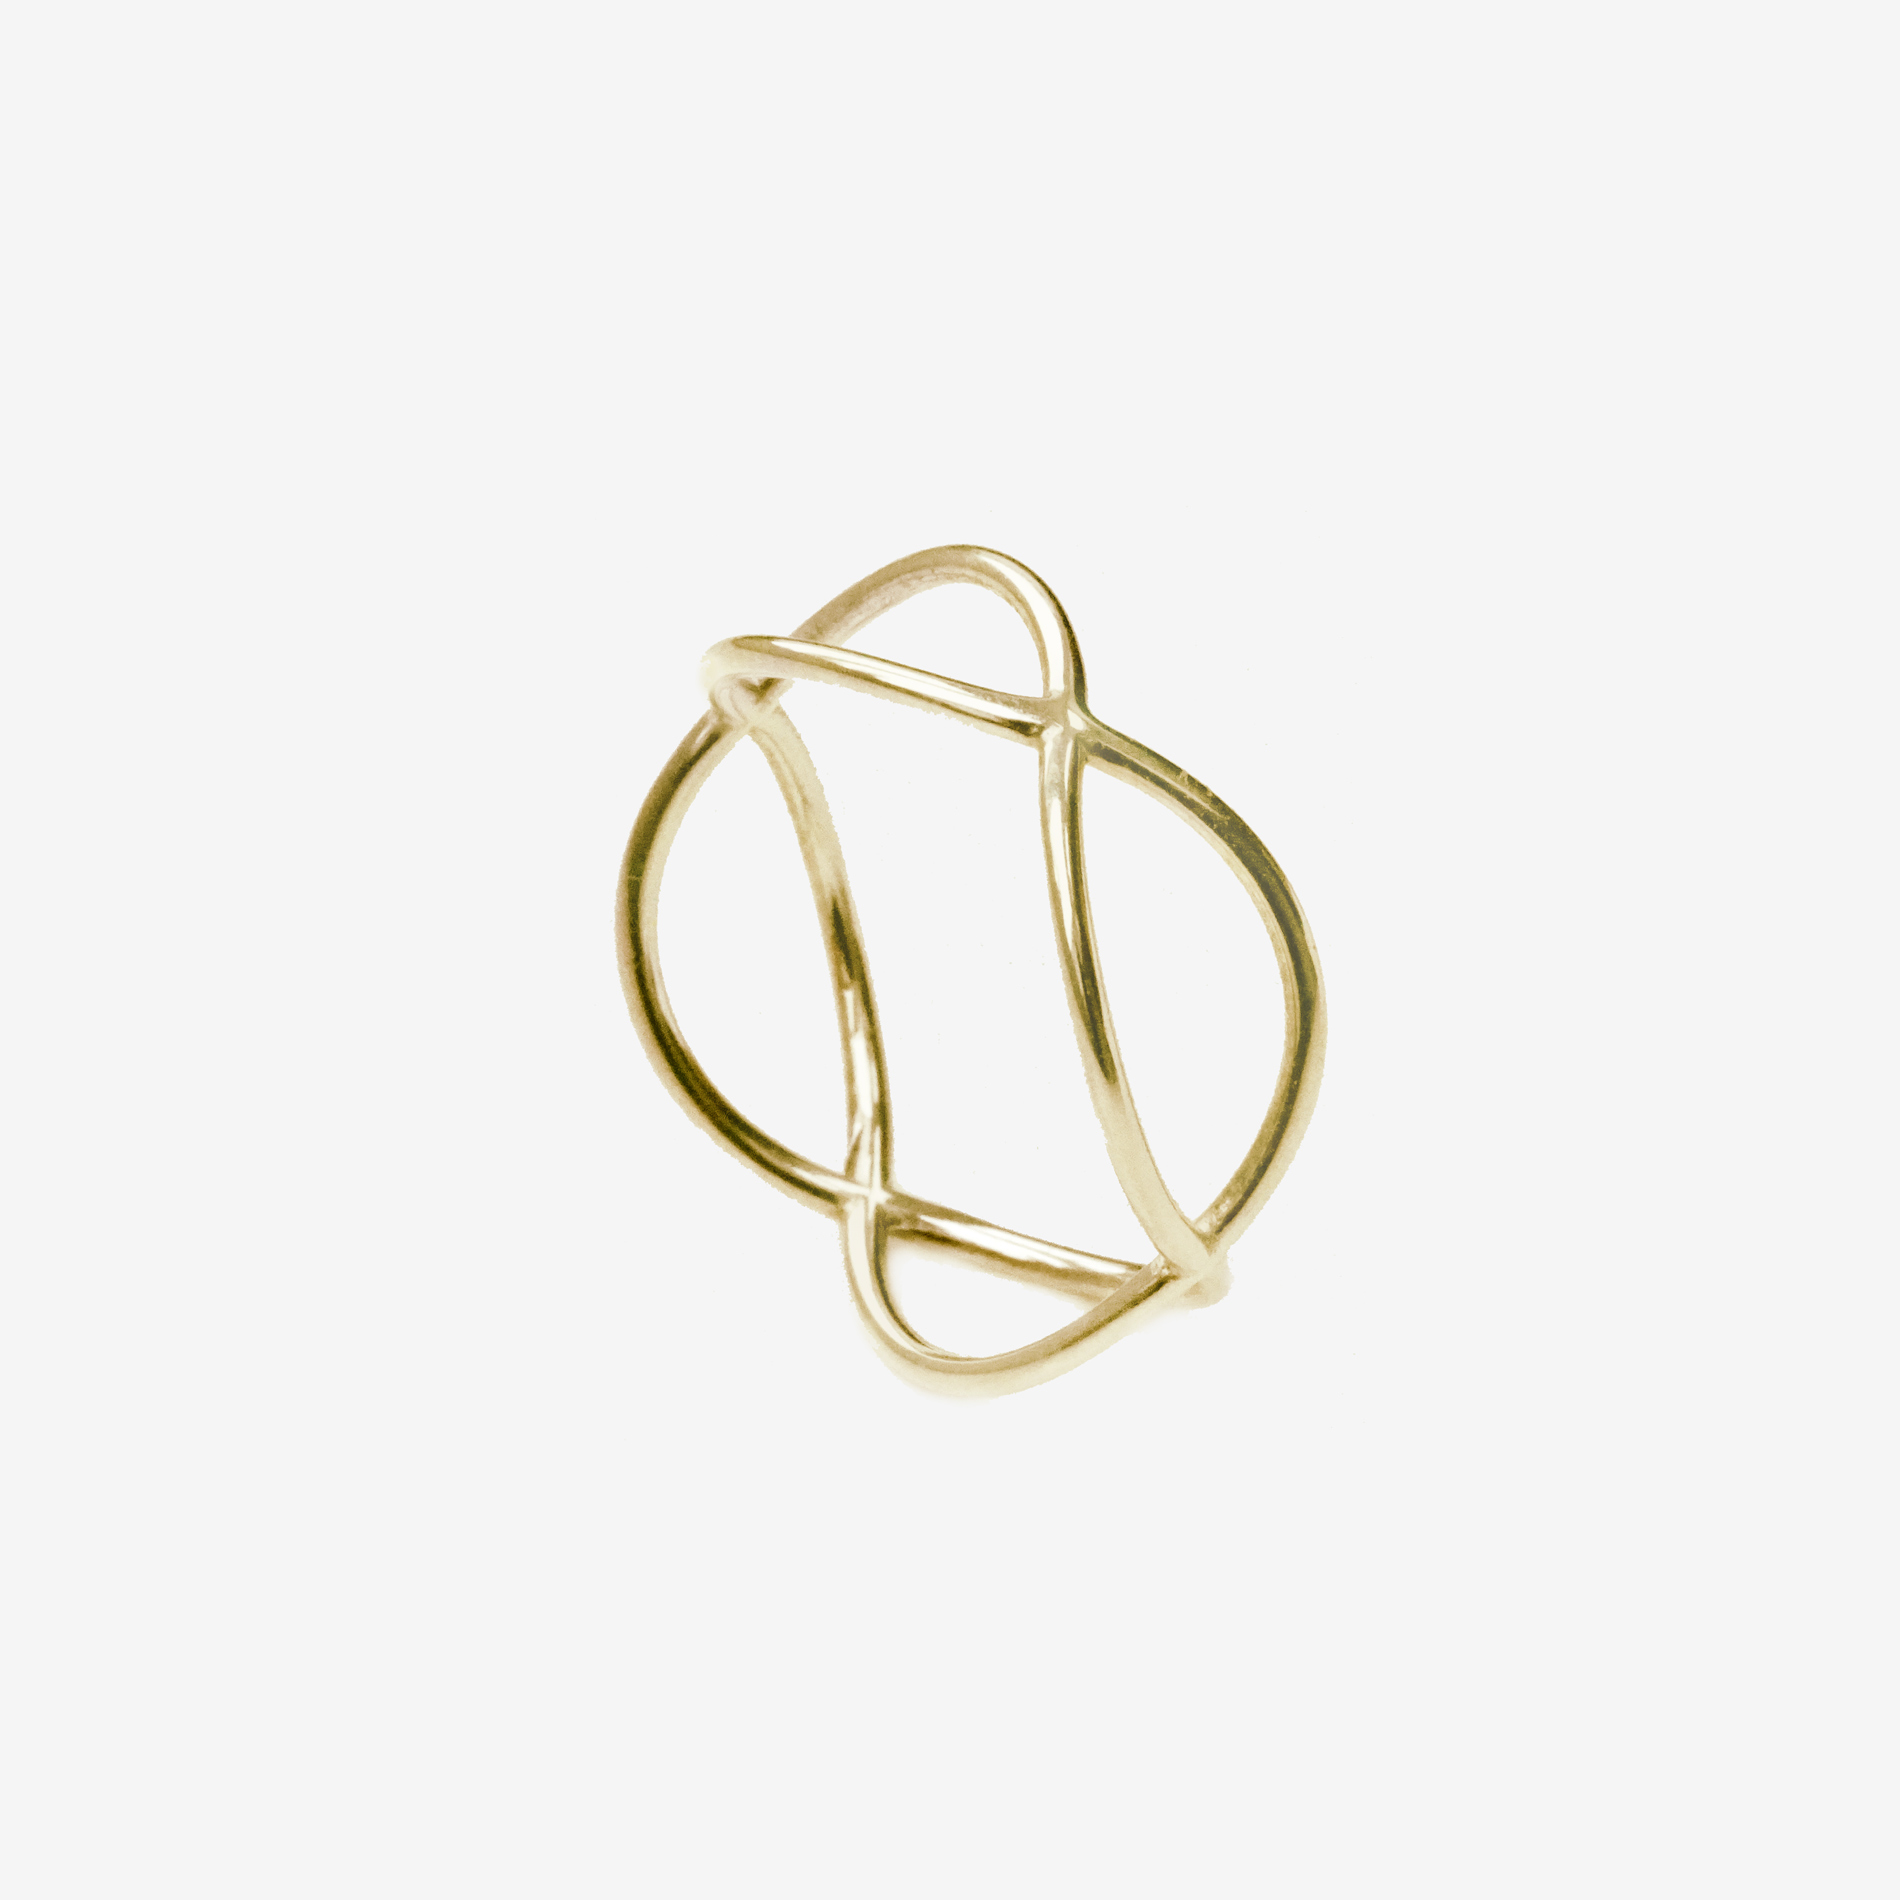 TIMES TWO gold ring - NURA.design